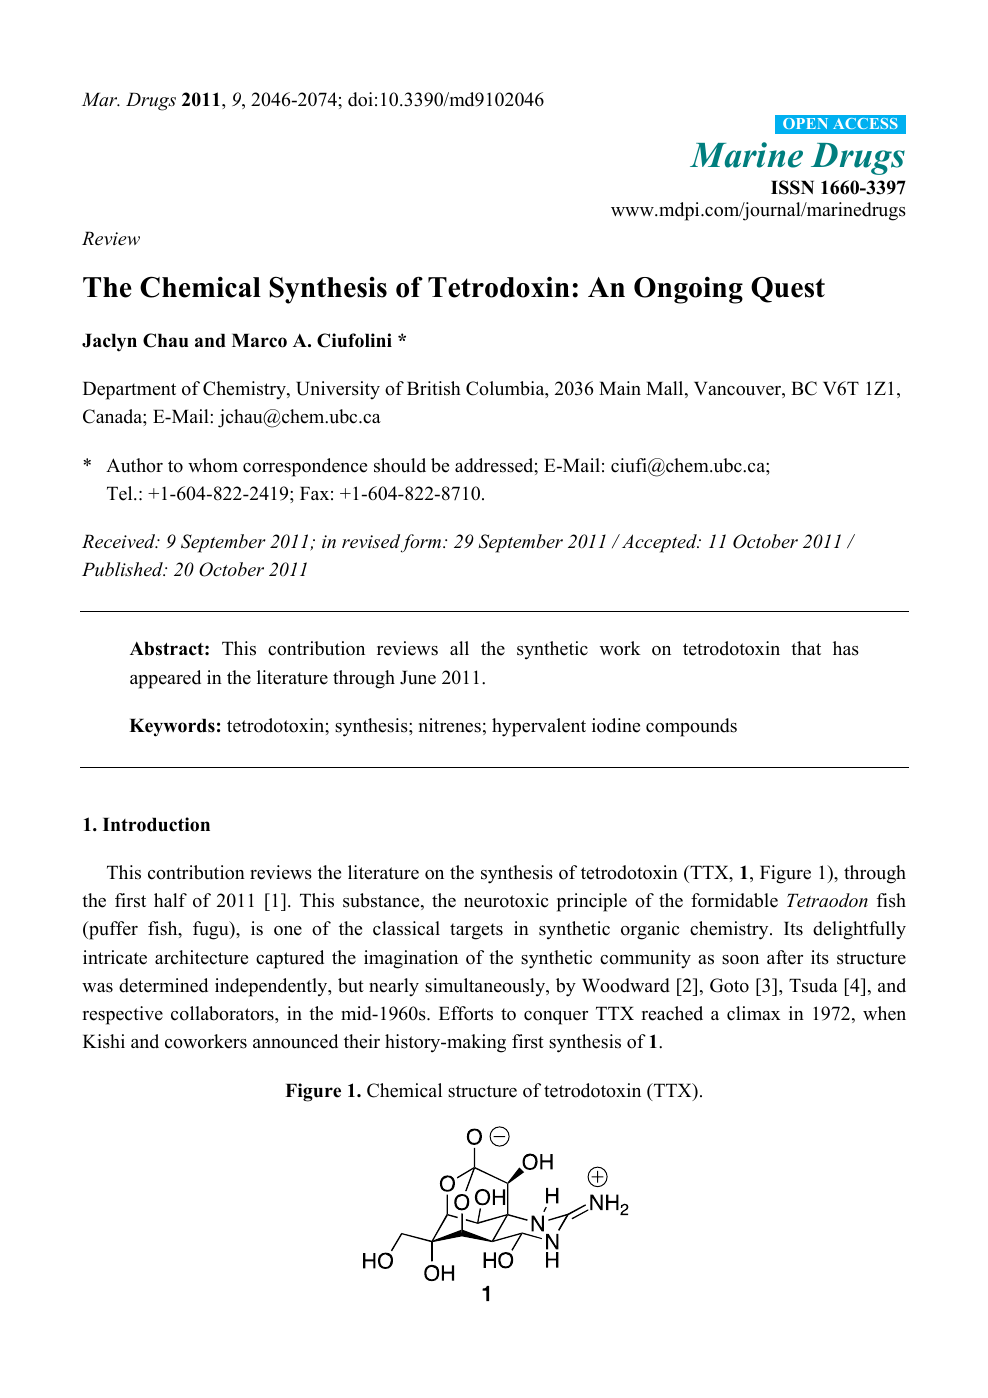 The Chemical Synthesis of Tetrodoxin: An Ongoing Quest – topic of